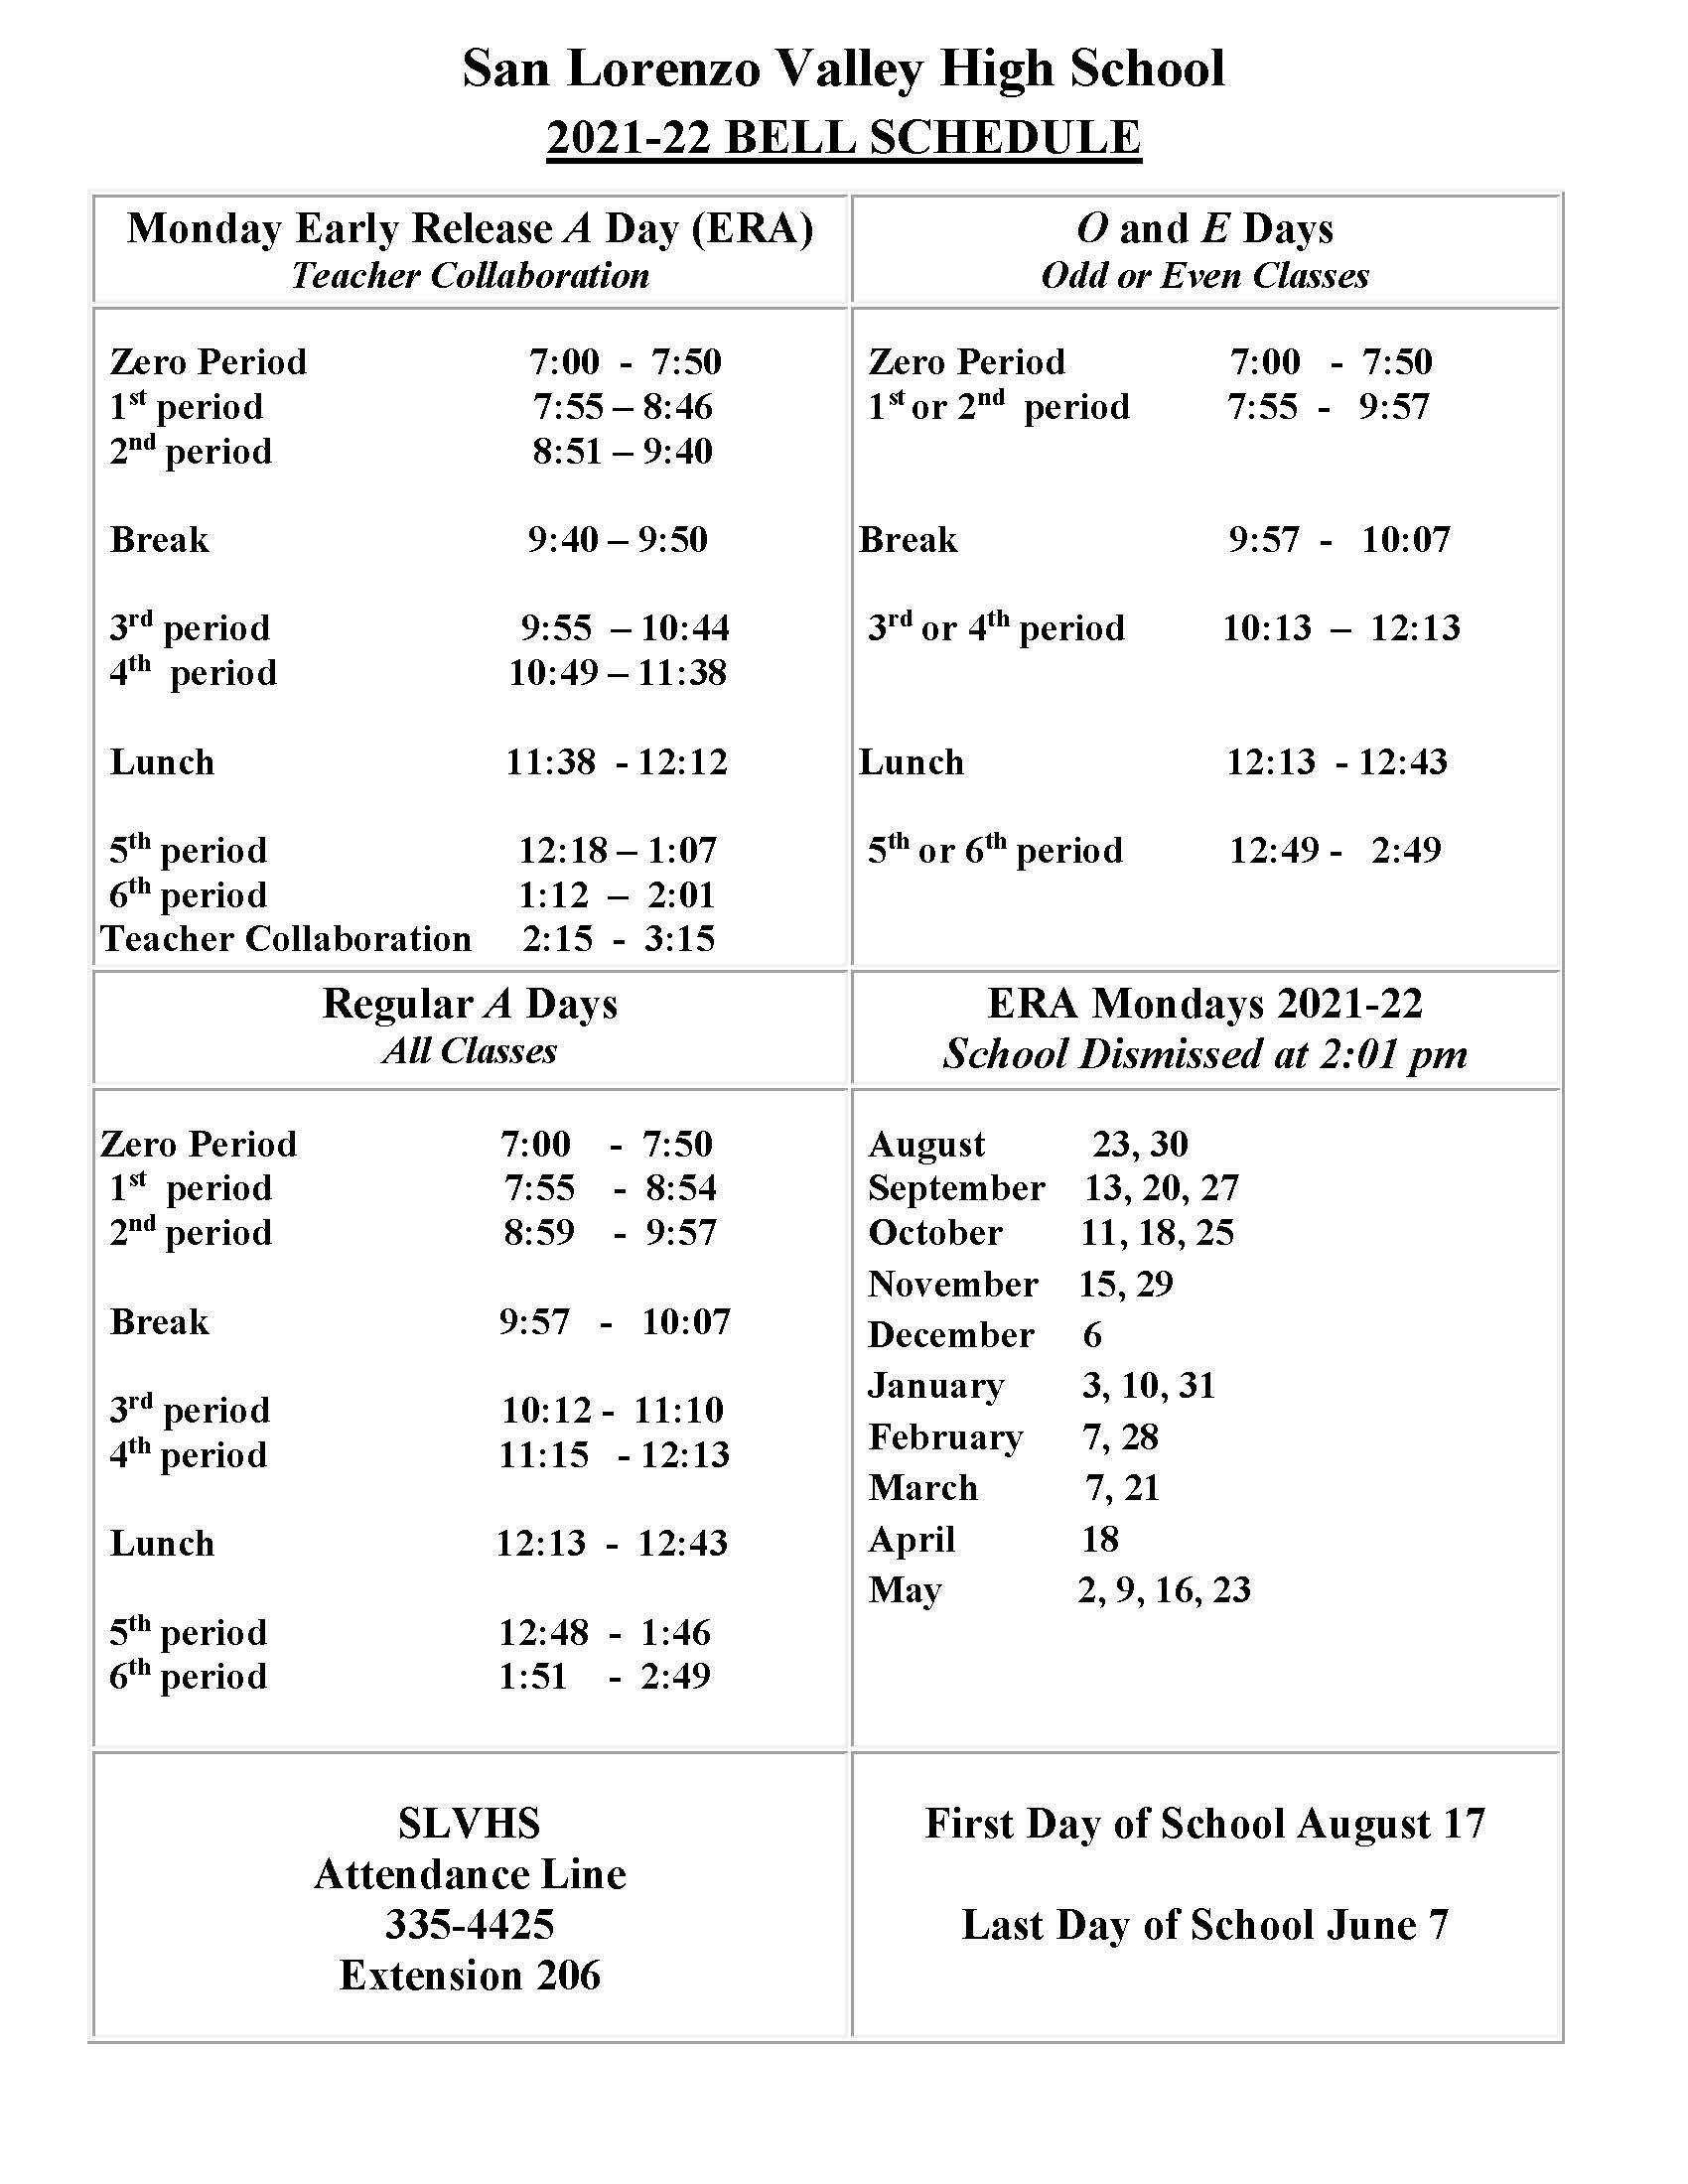 bell schedule; for details call 831-335-4425 x200